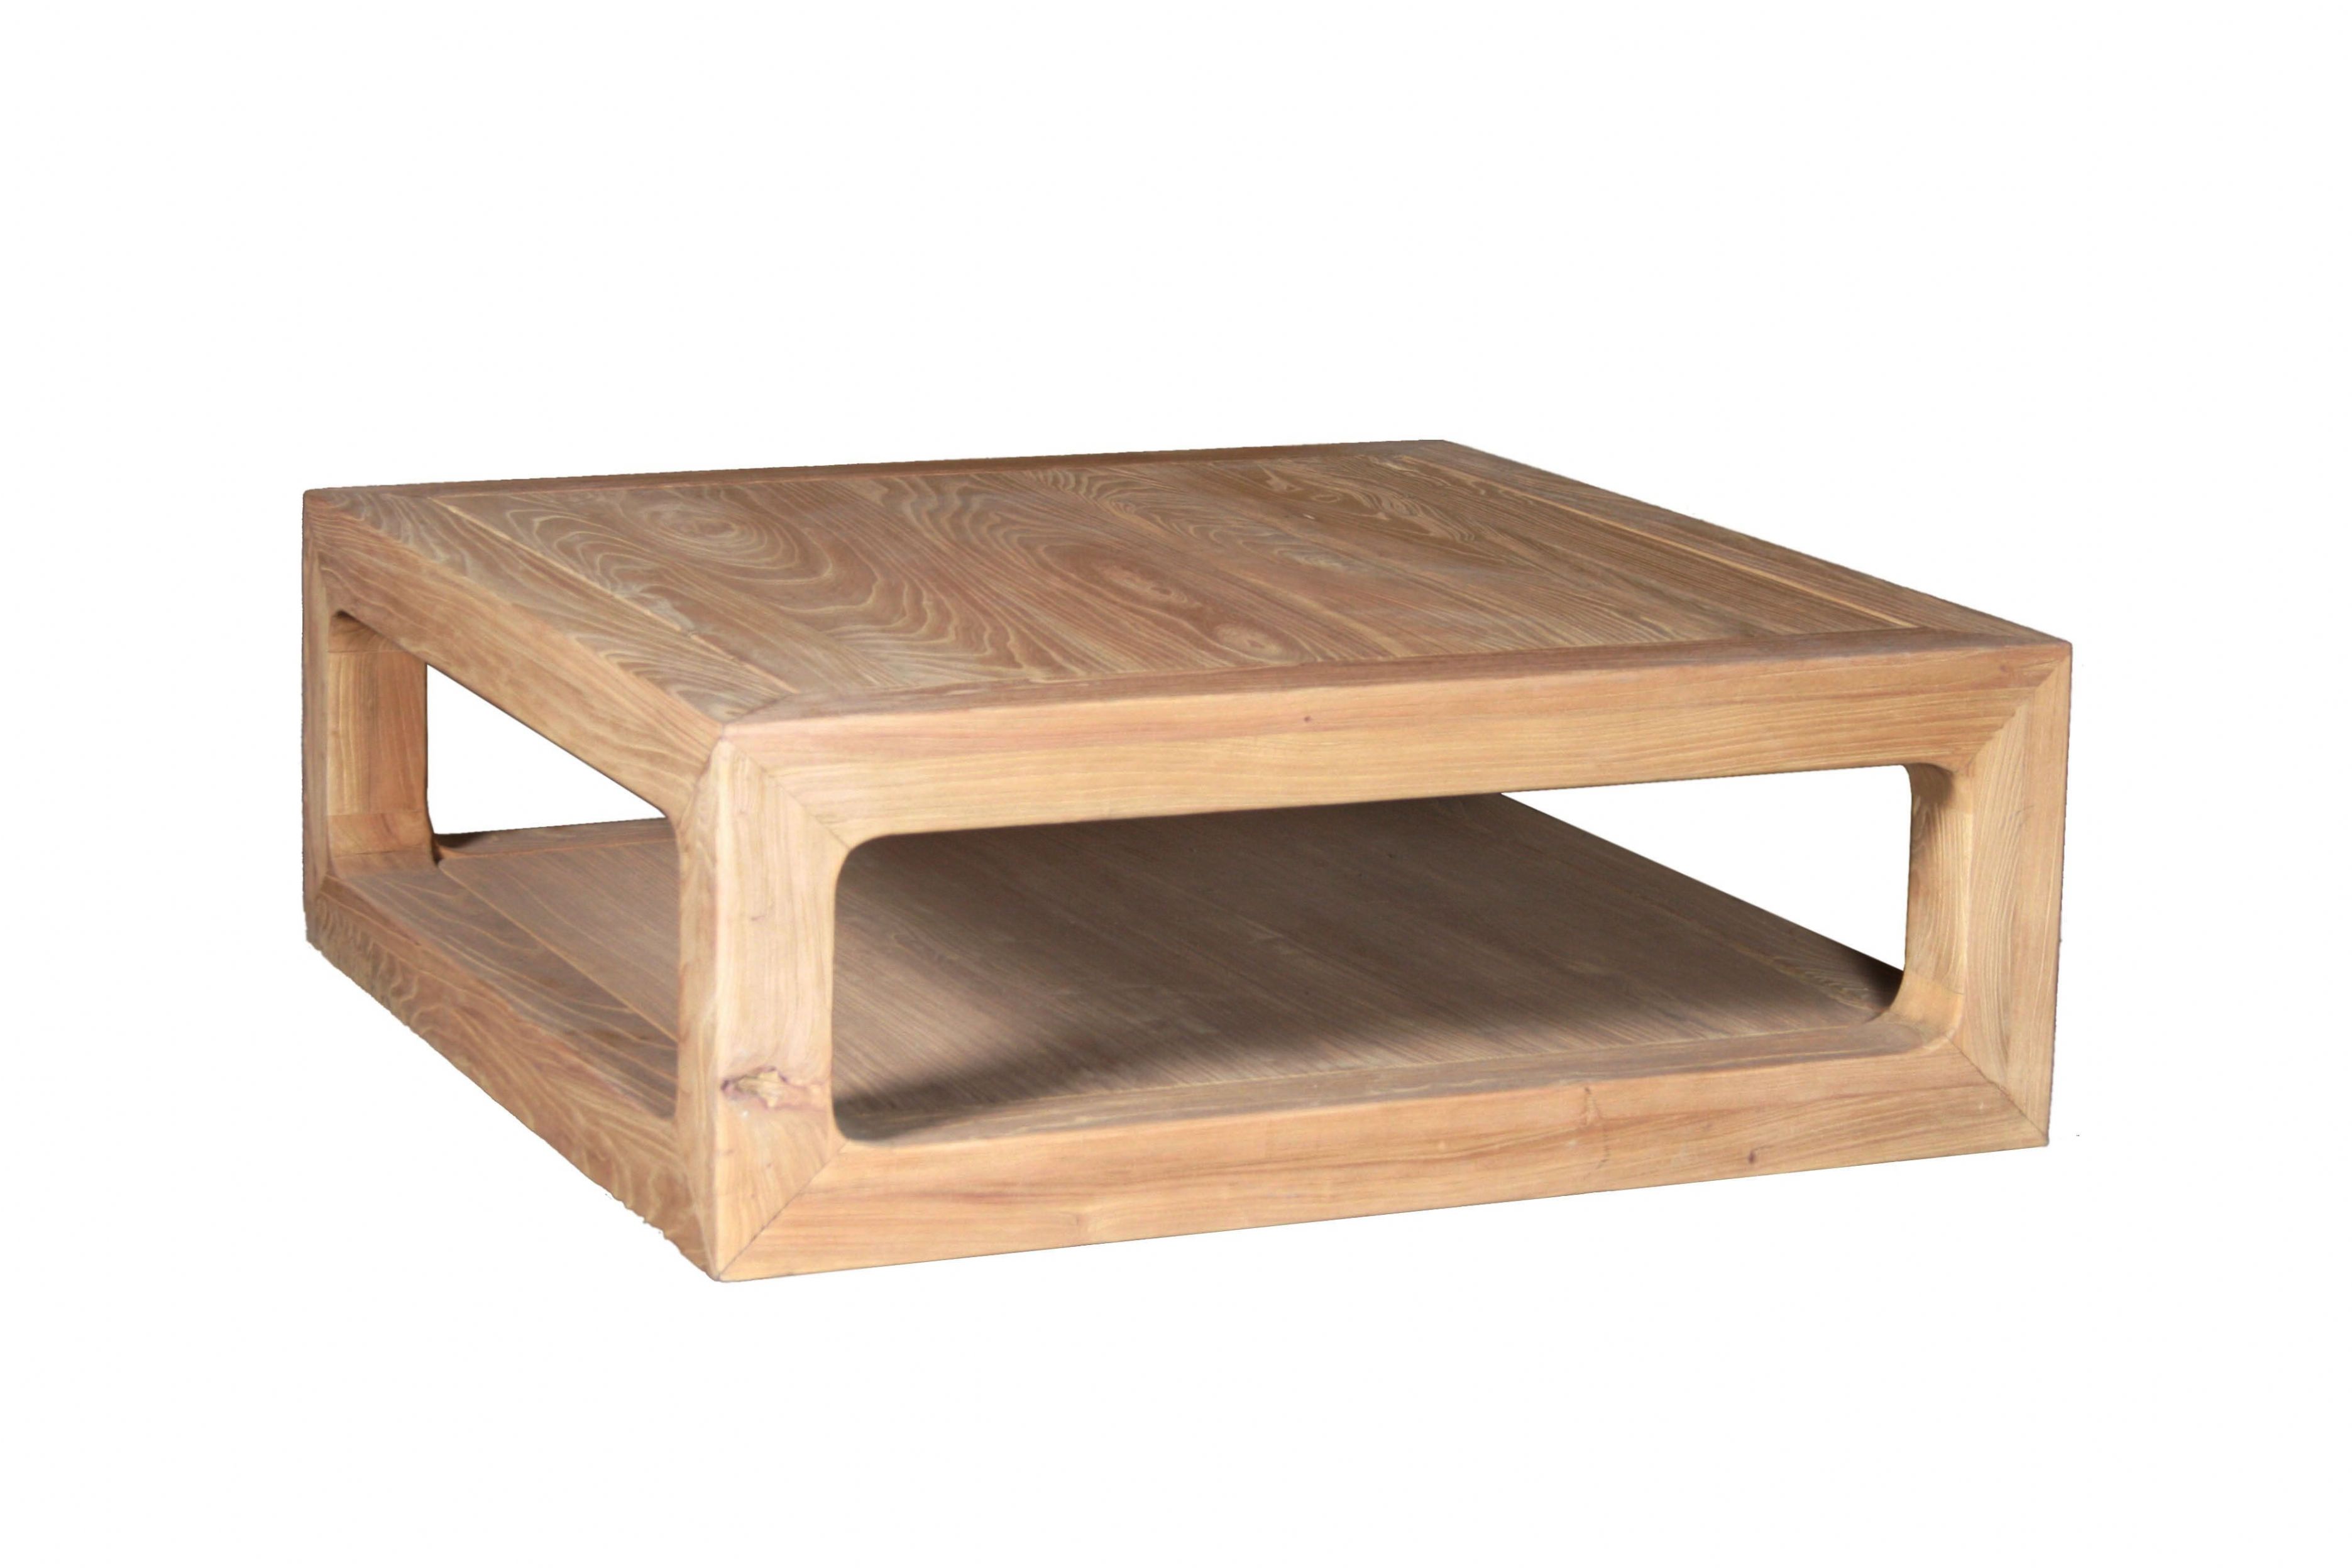 wooden coffee table design ideas photo - 1